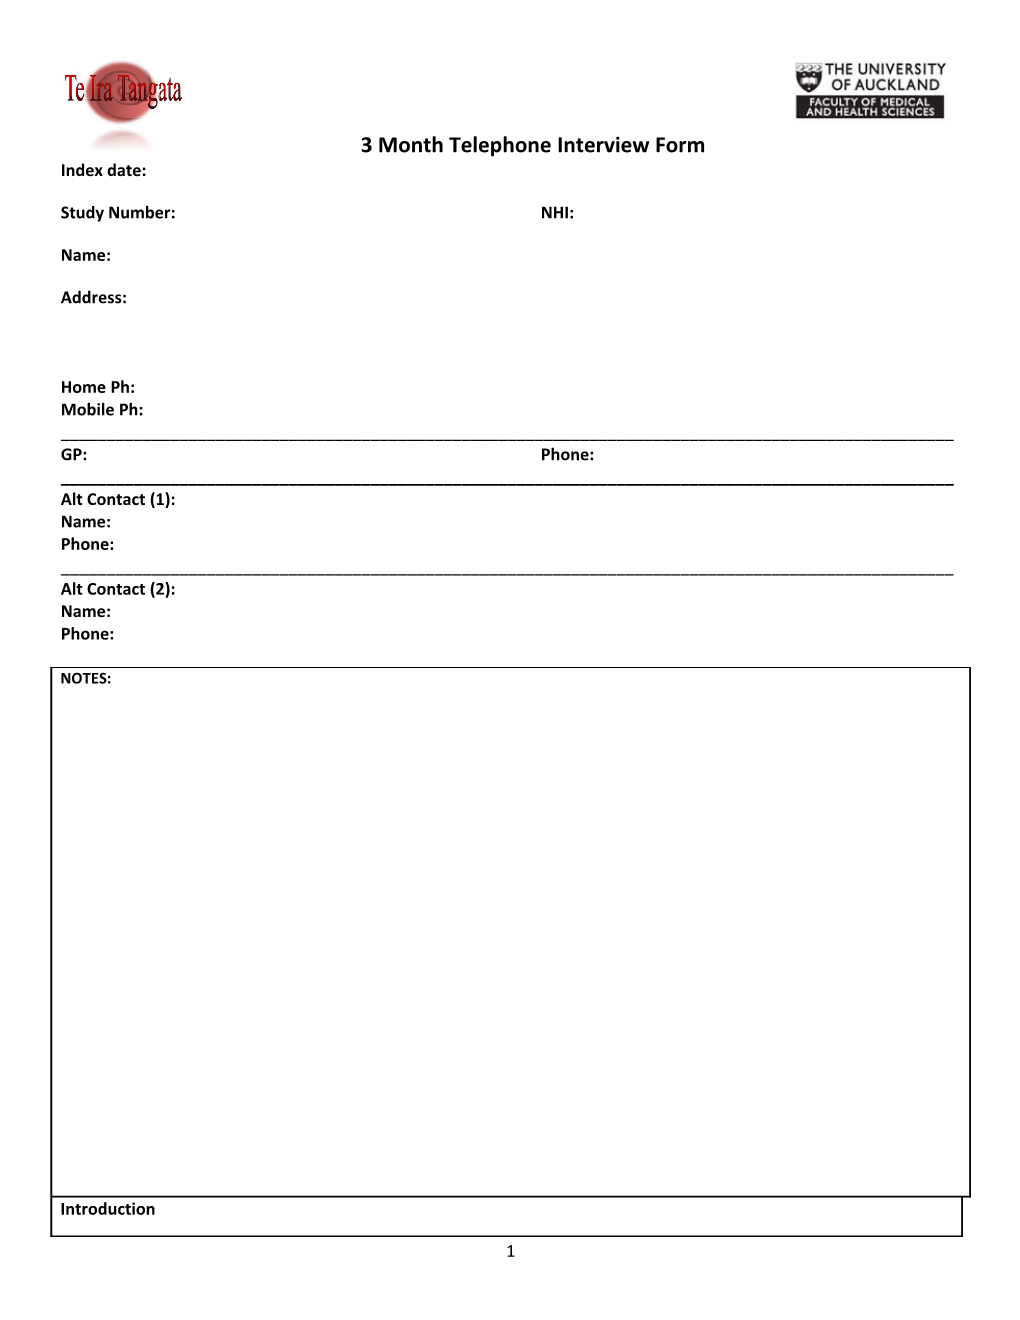 3 Month Telephone Interview Form